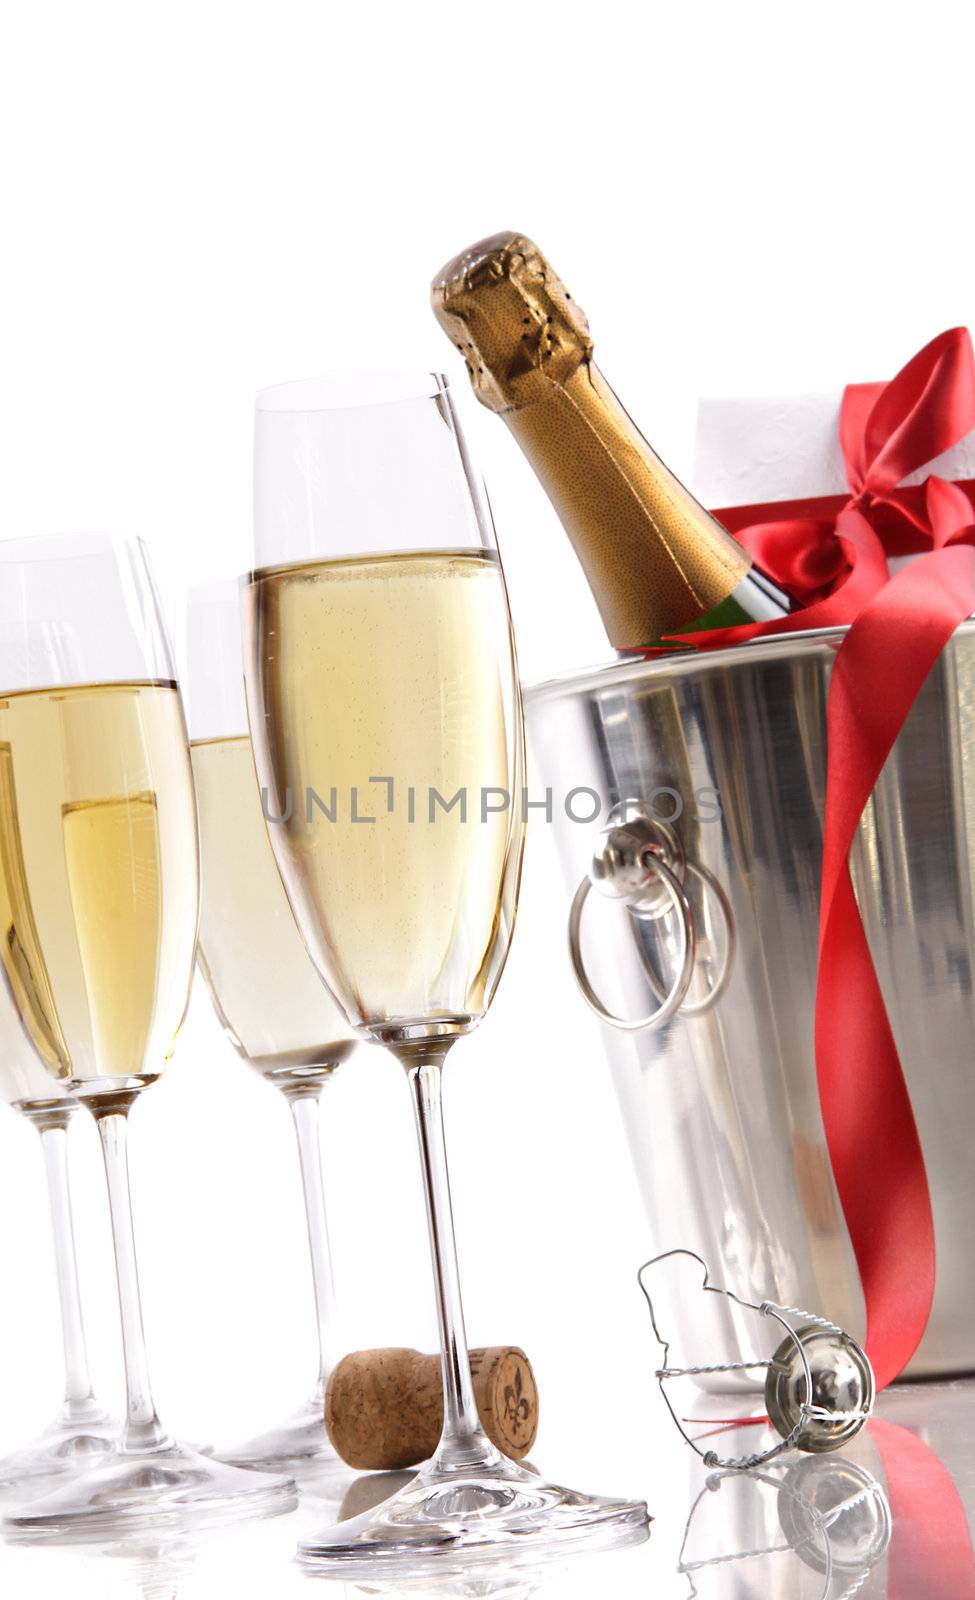 Glasses with Champagne in ice bucket and gift by Sandralise